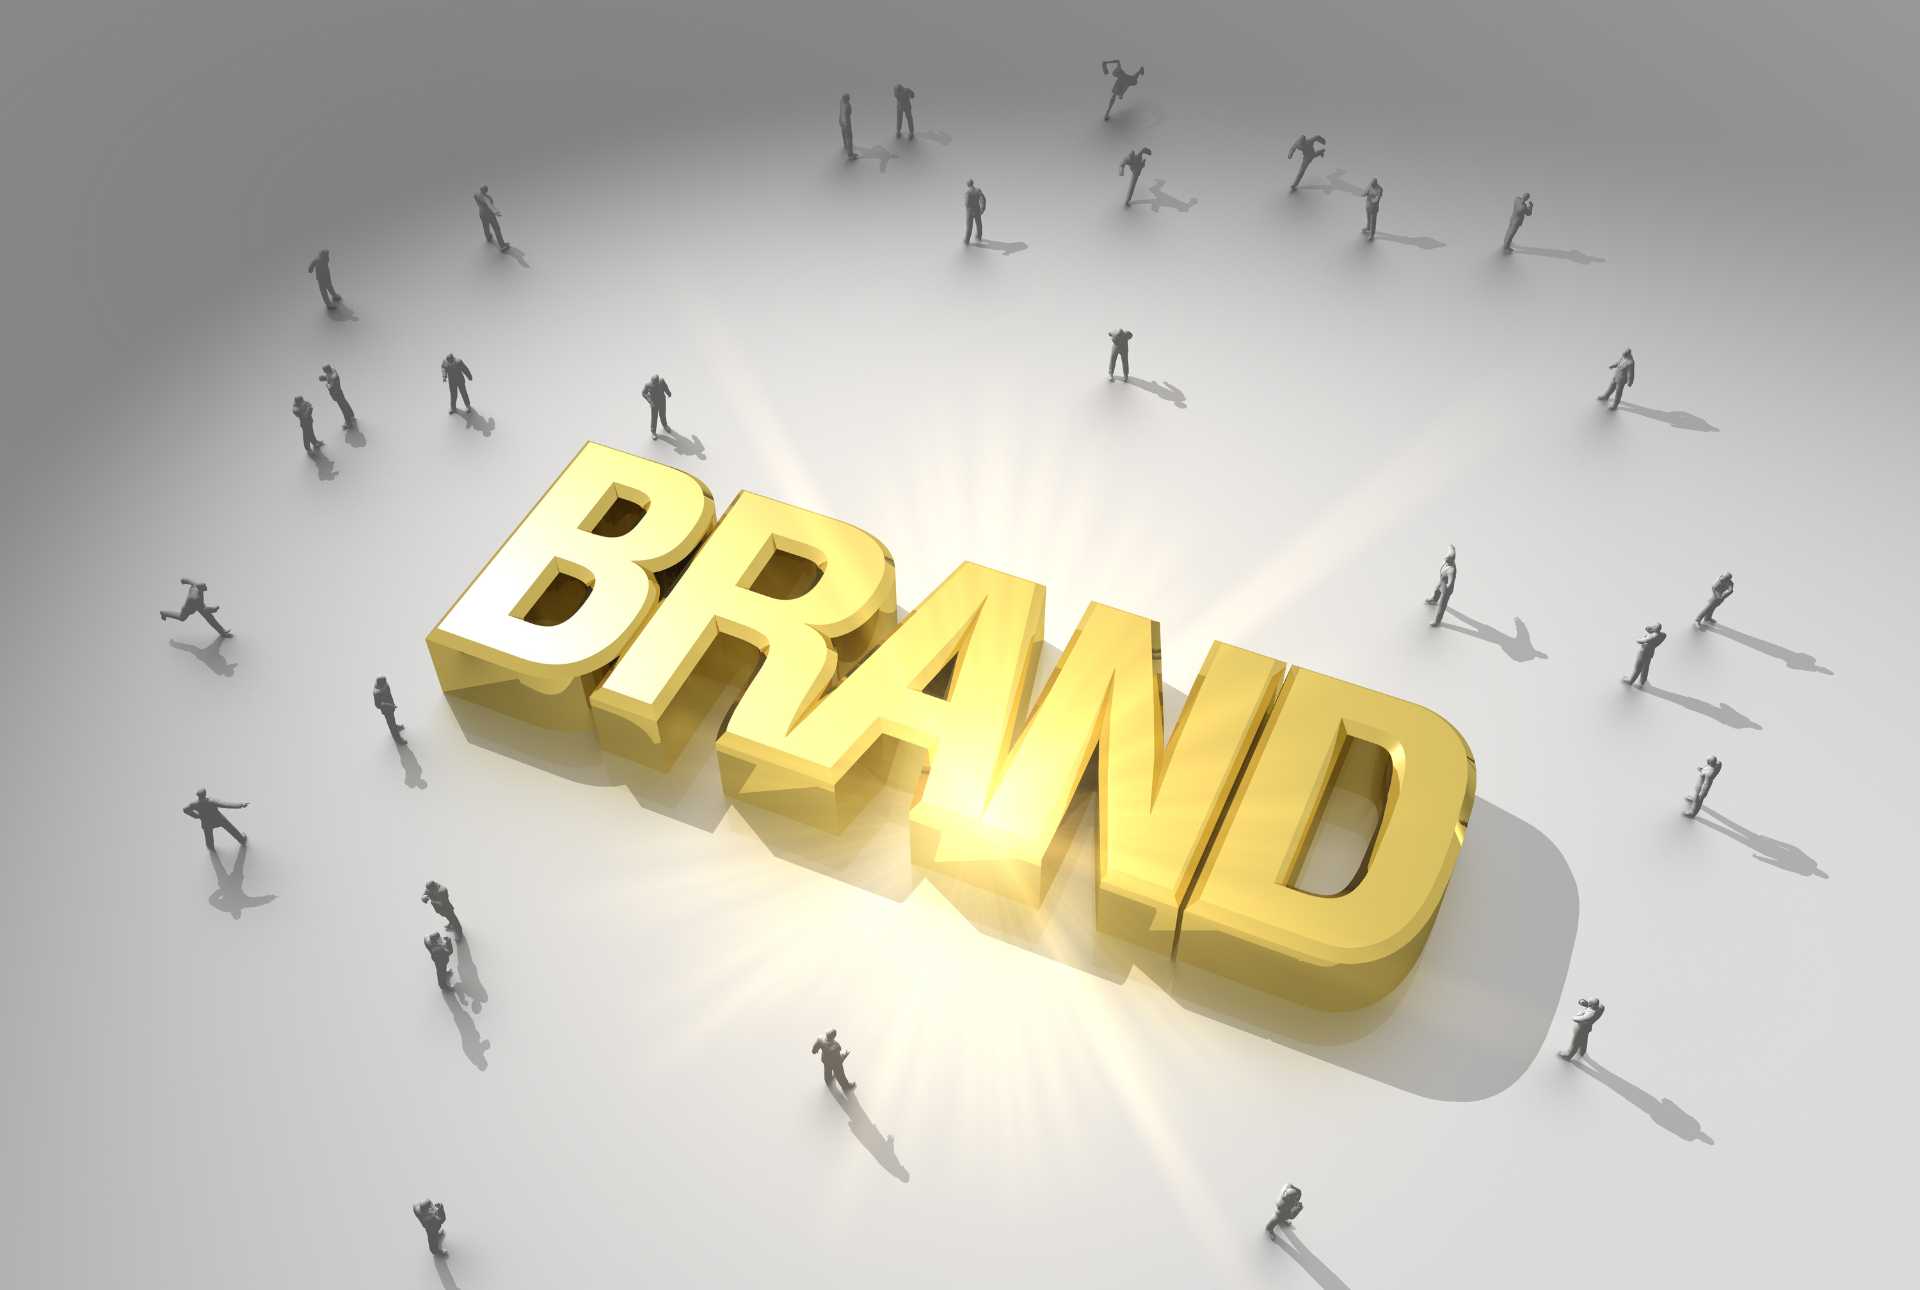 importance of brand